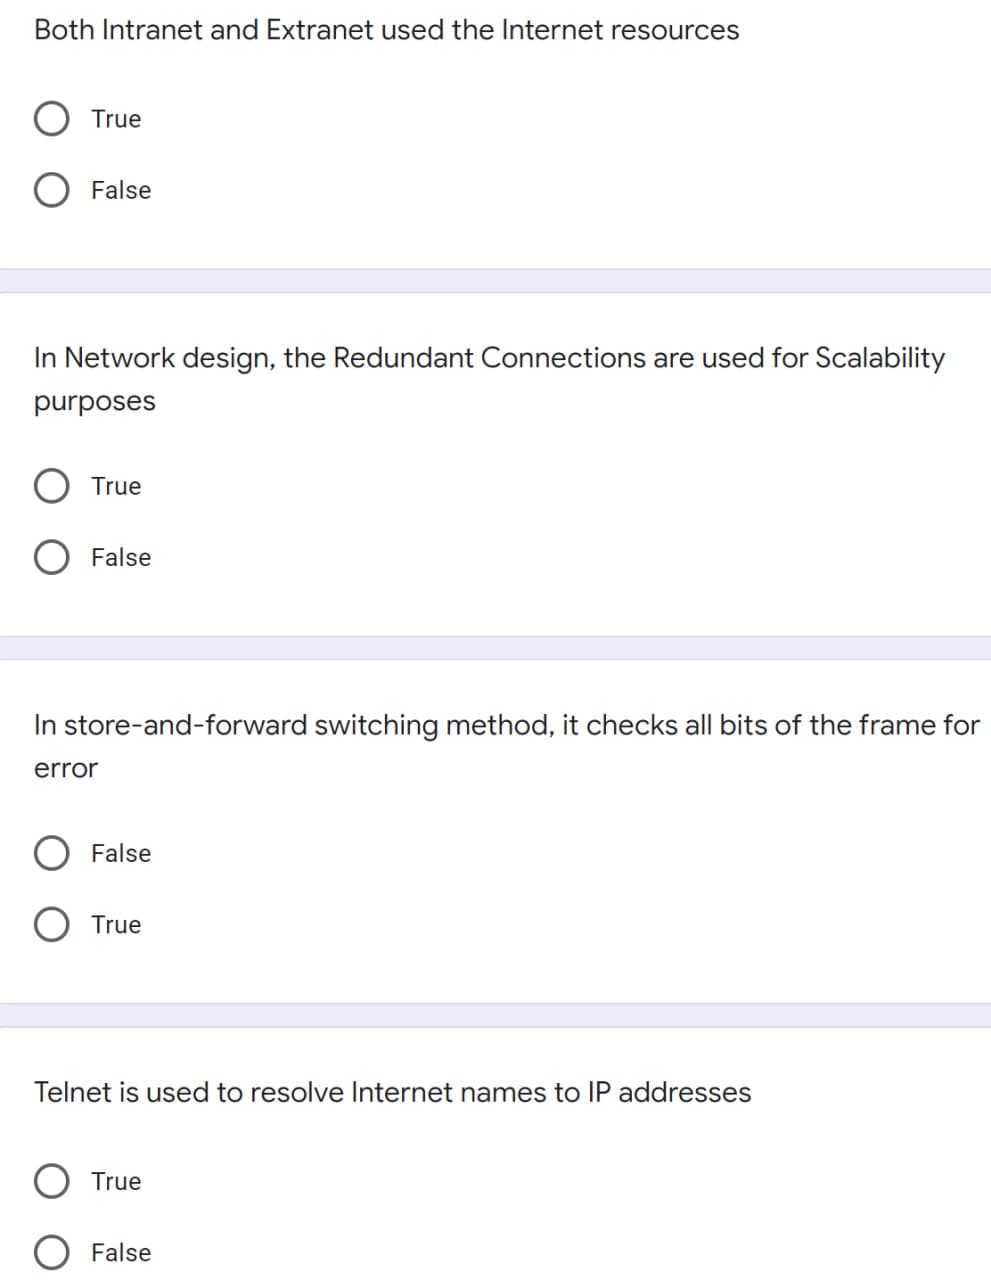 Both Intranet and Extranet used the Internet resources
True
O False
In Network design, the Redundant Connections are used for Scalability
purposes
True
False
In store-and-forward switching method, it checks all bits of the frame for
error
False
O True
Telnet is used to resolve Internet names to IP addresses
True
False
